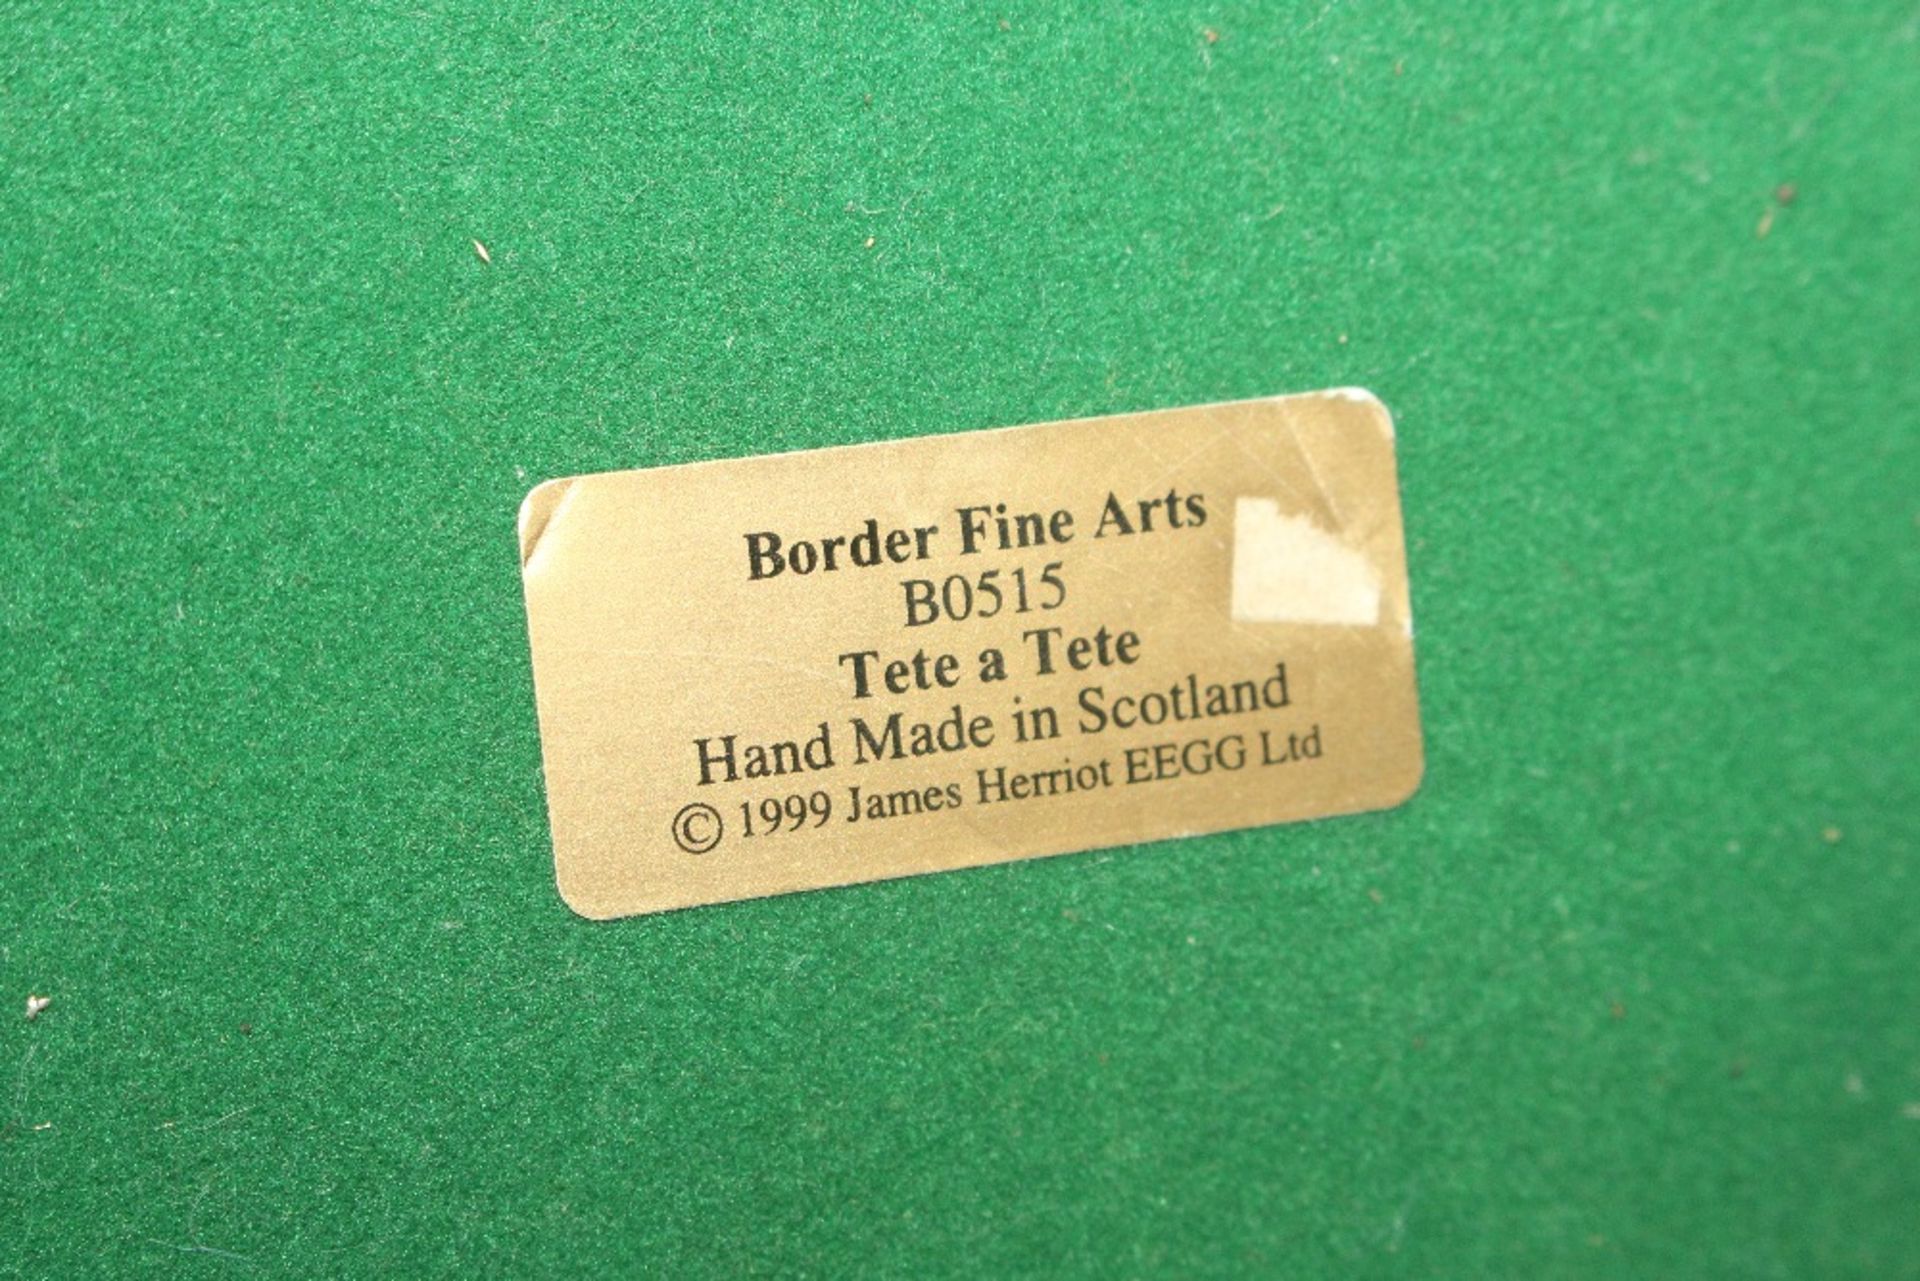 Border Fine Arts "Tete-a-Tete" by Kirsty Armstrong - Image 5 of 5